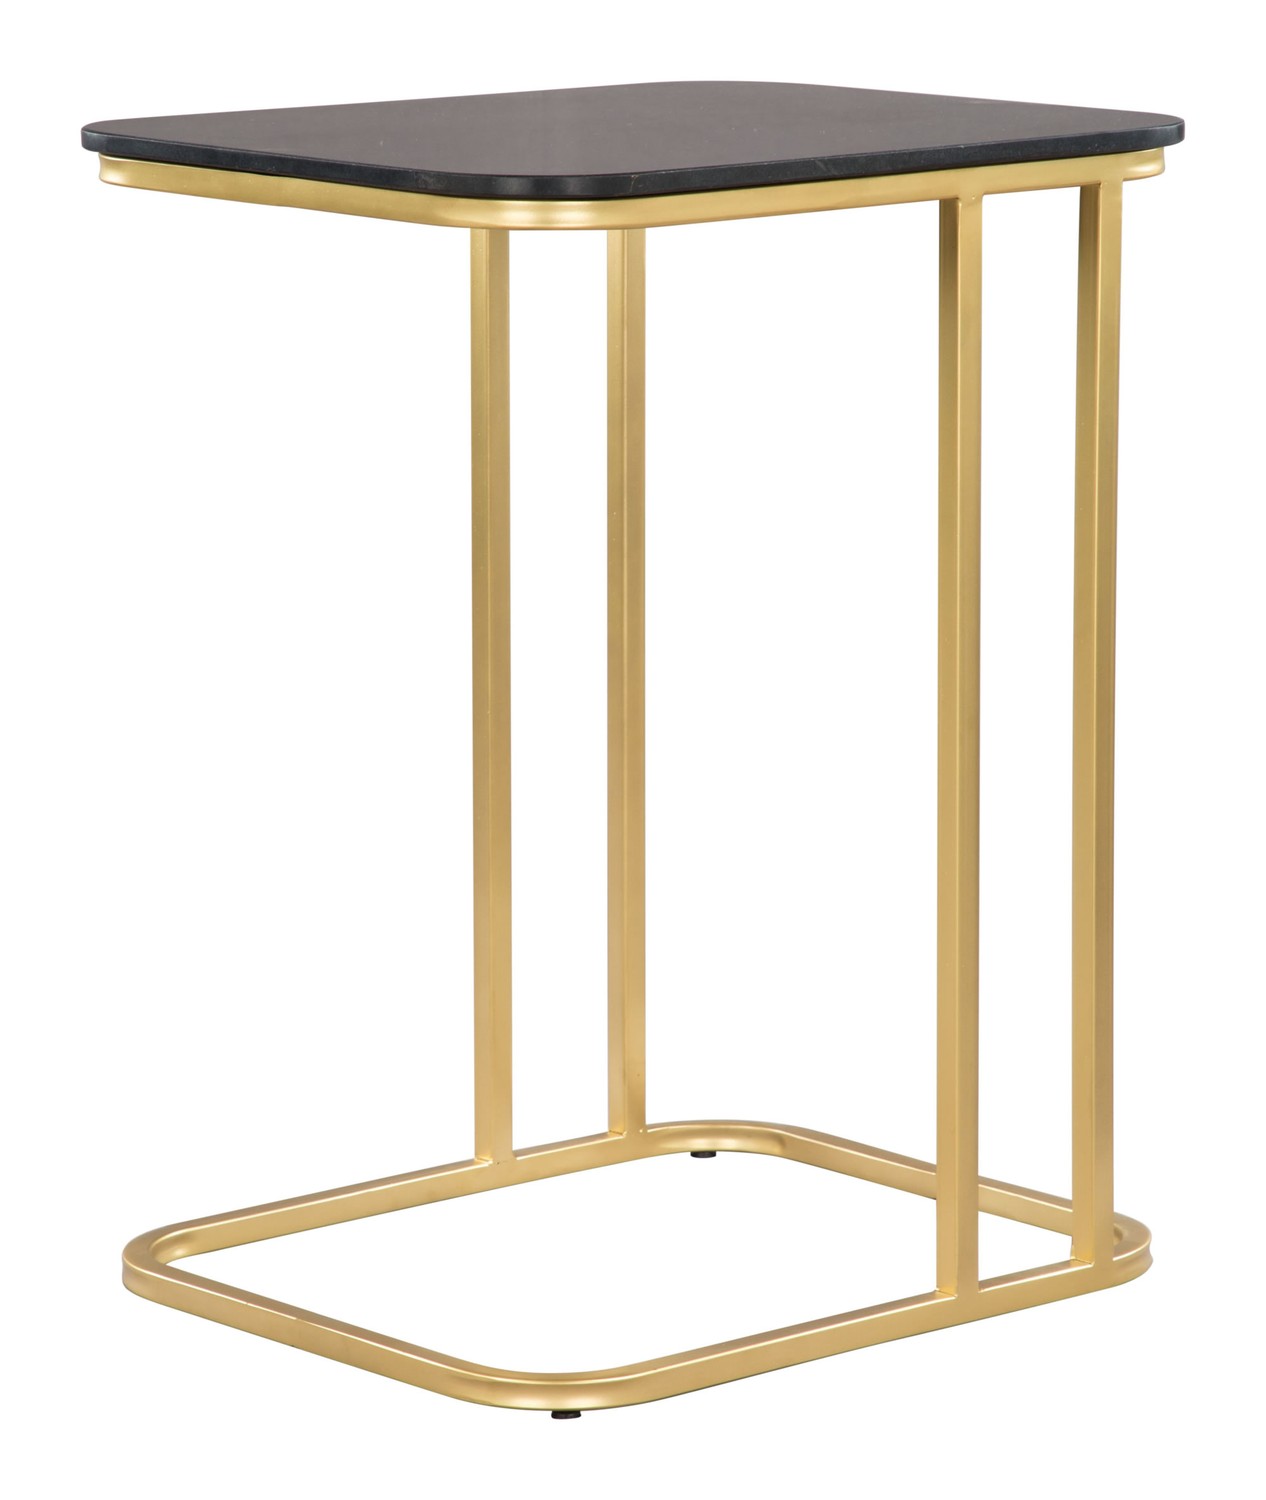 17.5" x 14.5" x 22.3" Black & Gold, Marble, Metal, C-Side Table